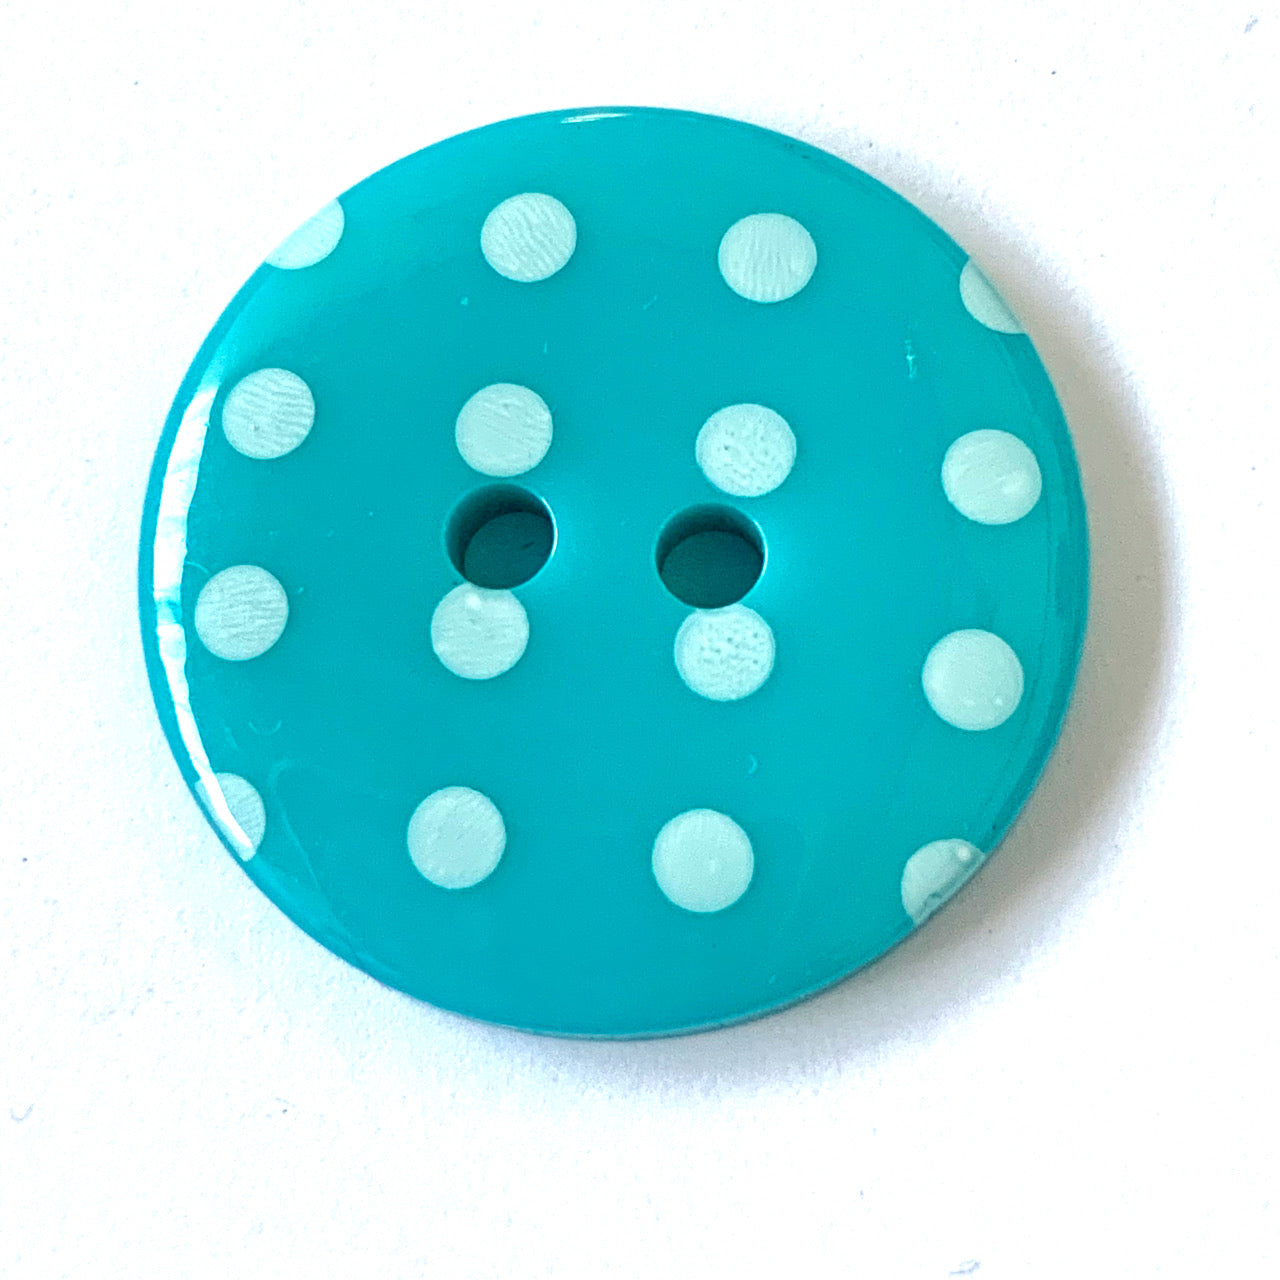 18mm Fine Style Polka Dot Buttons